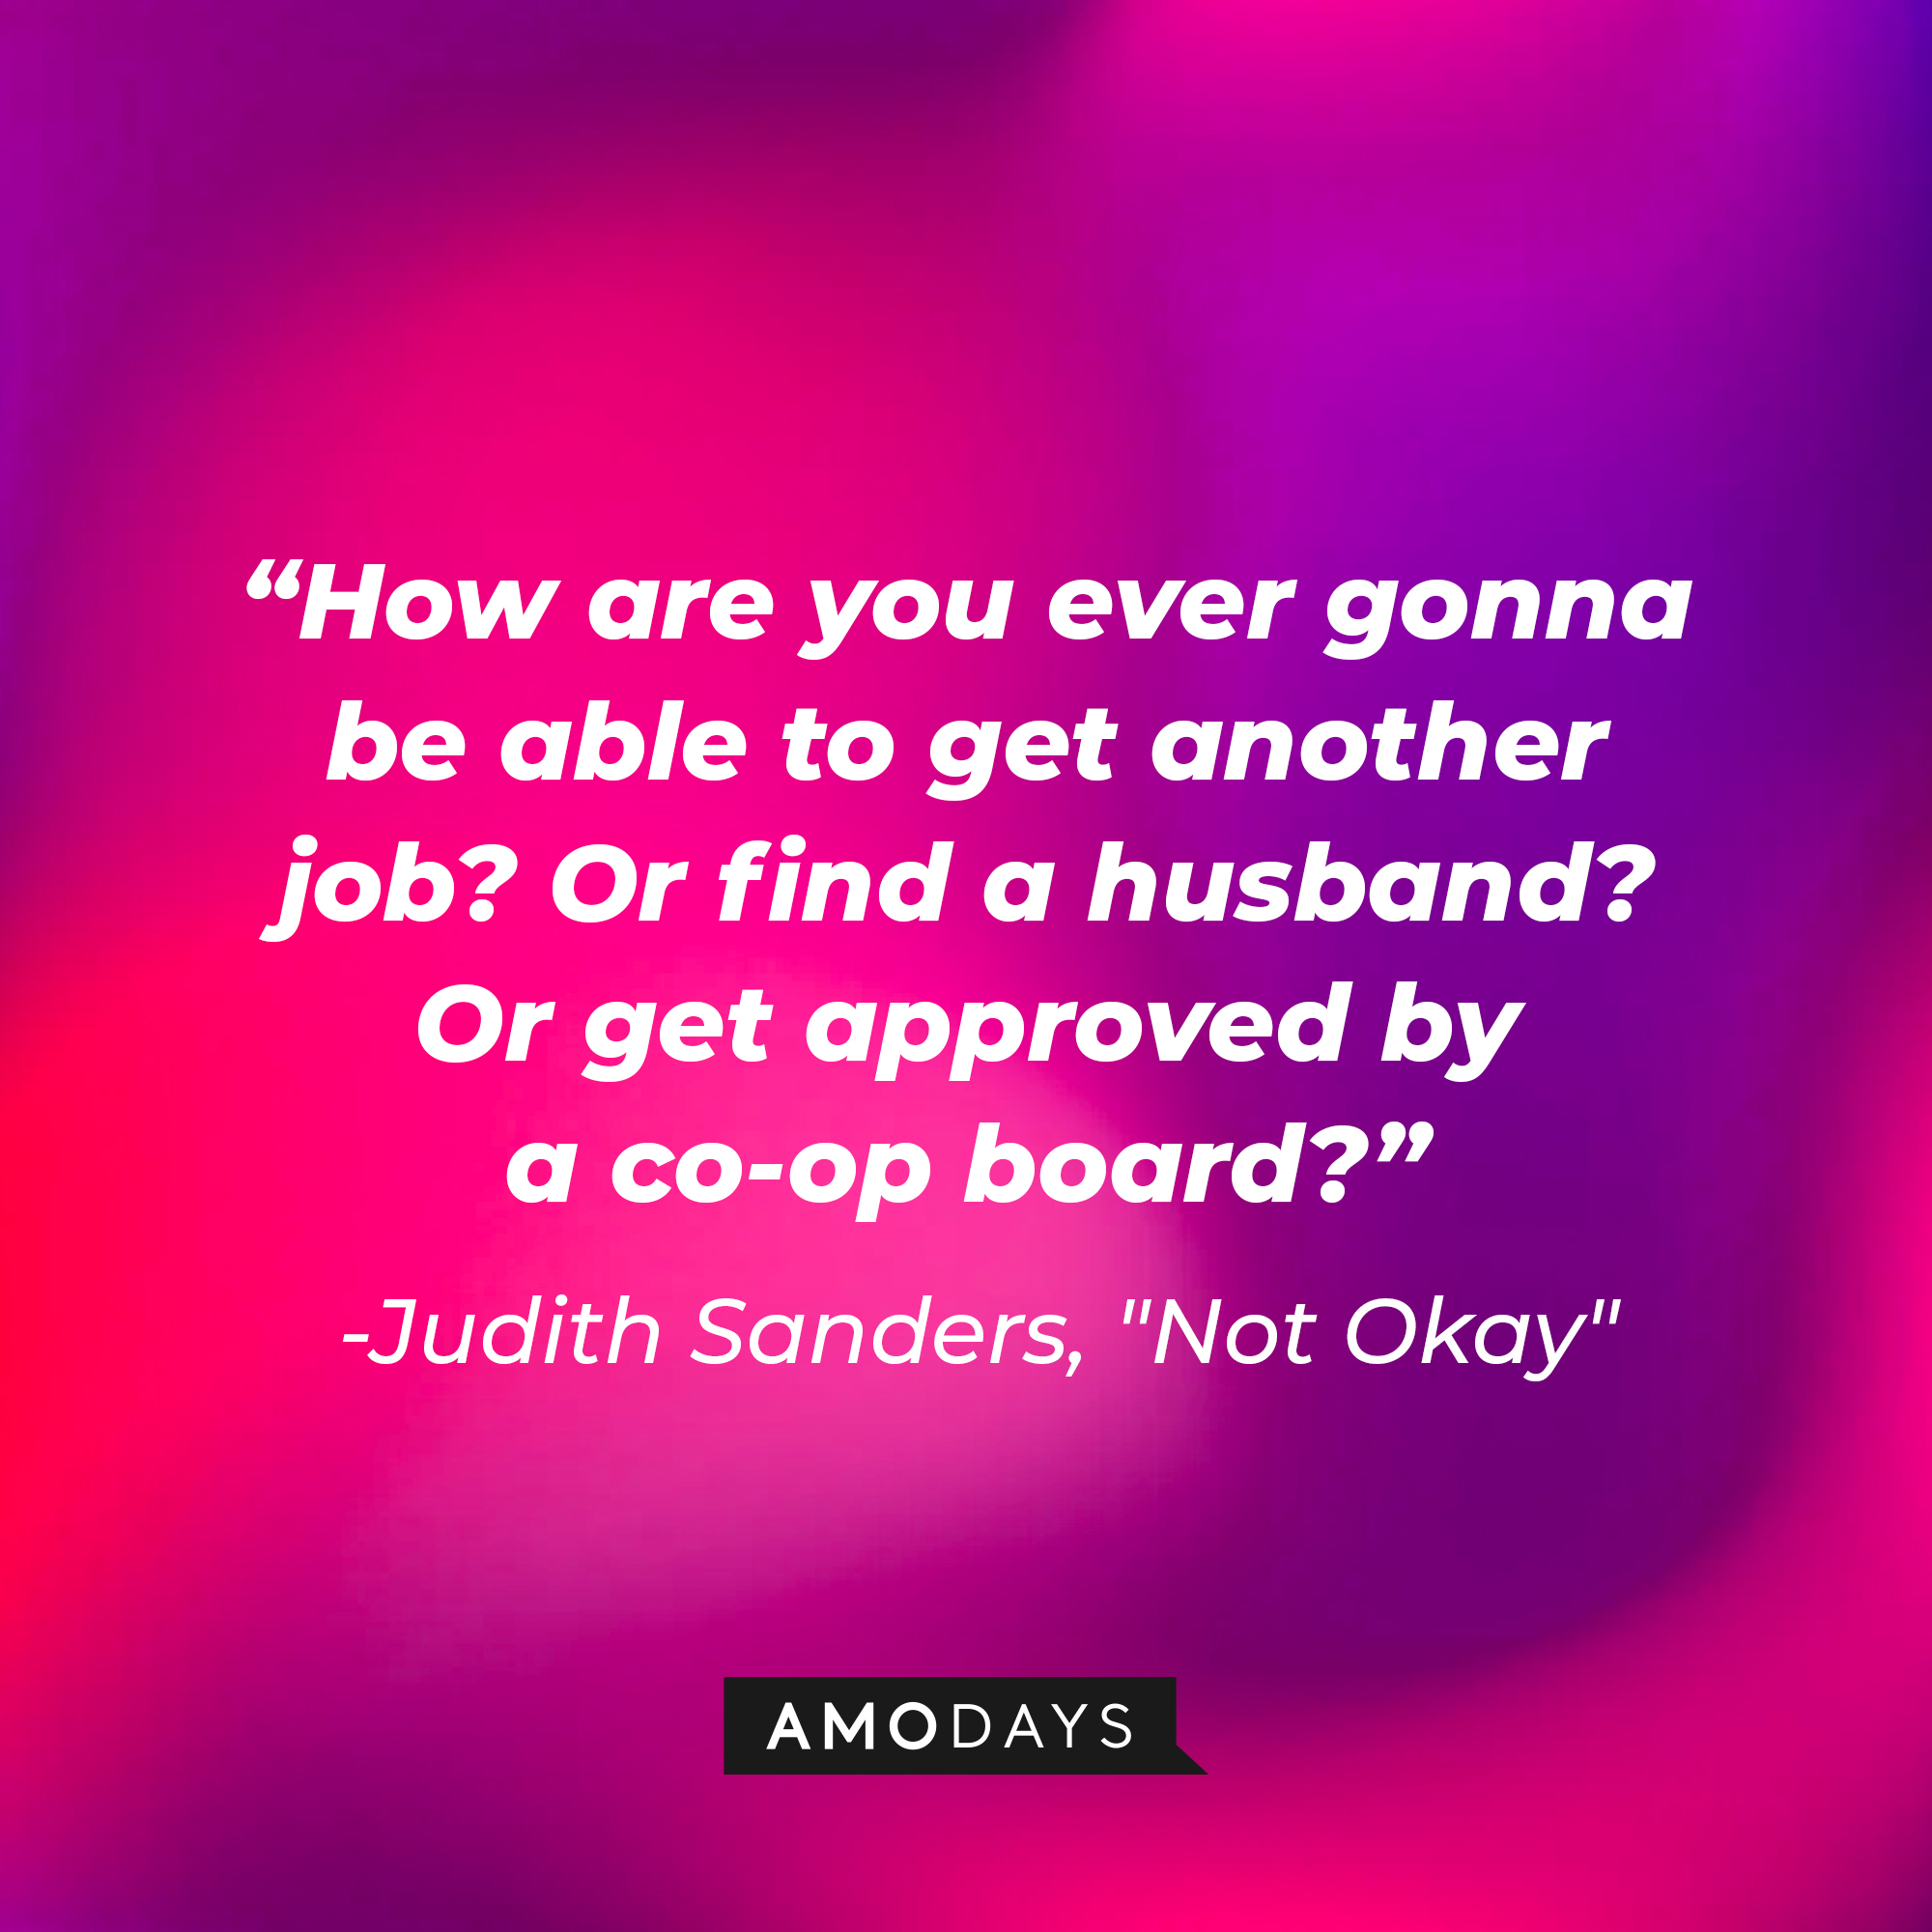 Judith Sanders' quote: "How are you ever gonna be able to get another job? Or find a husband? Or get approved by a co-op board?" | Source: AmoDays